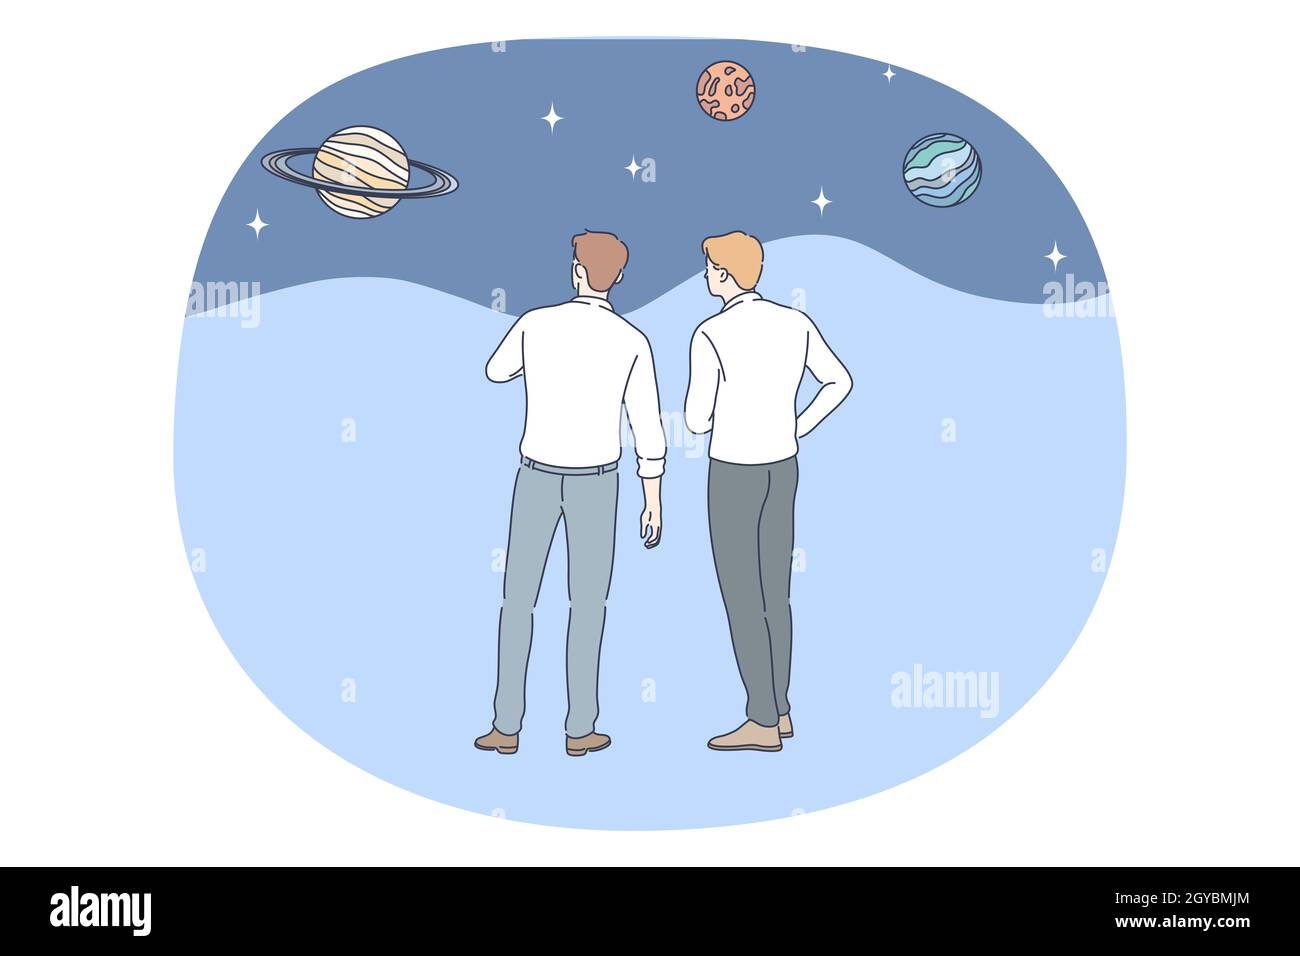 Astronomy and planetarium concept. Men scientists standing and observing planets in universe and discussing cosmos and galaxy together vector illustra Stock Photo